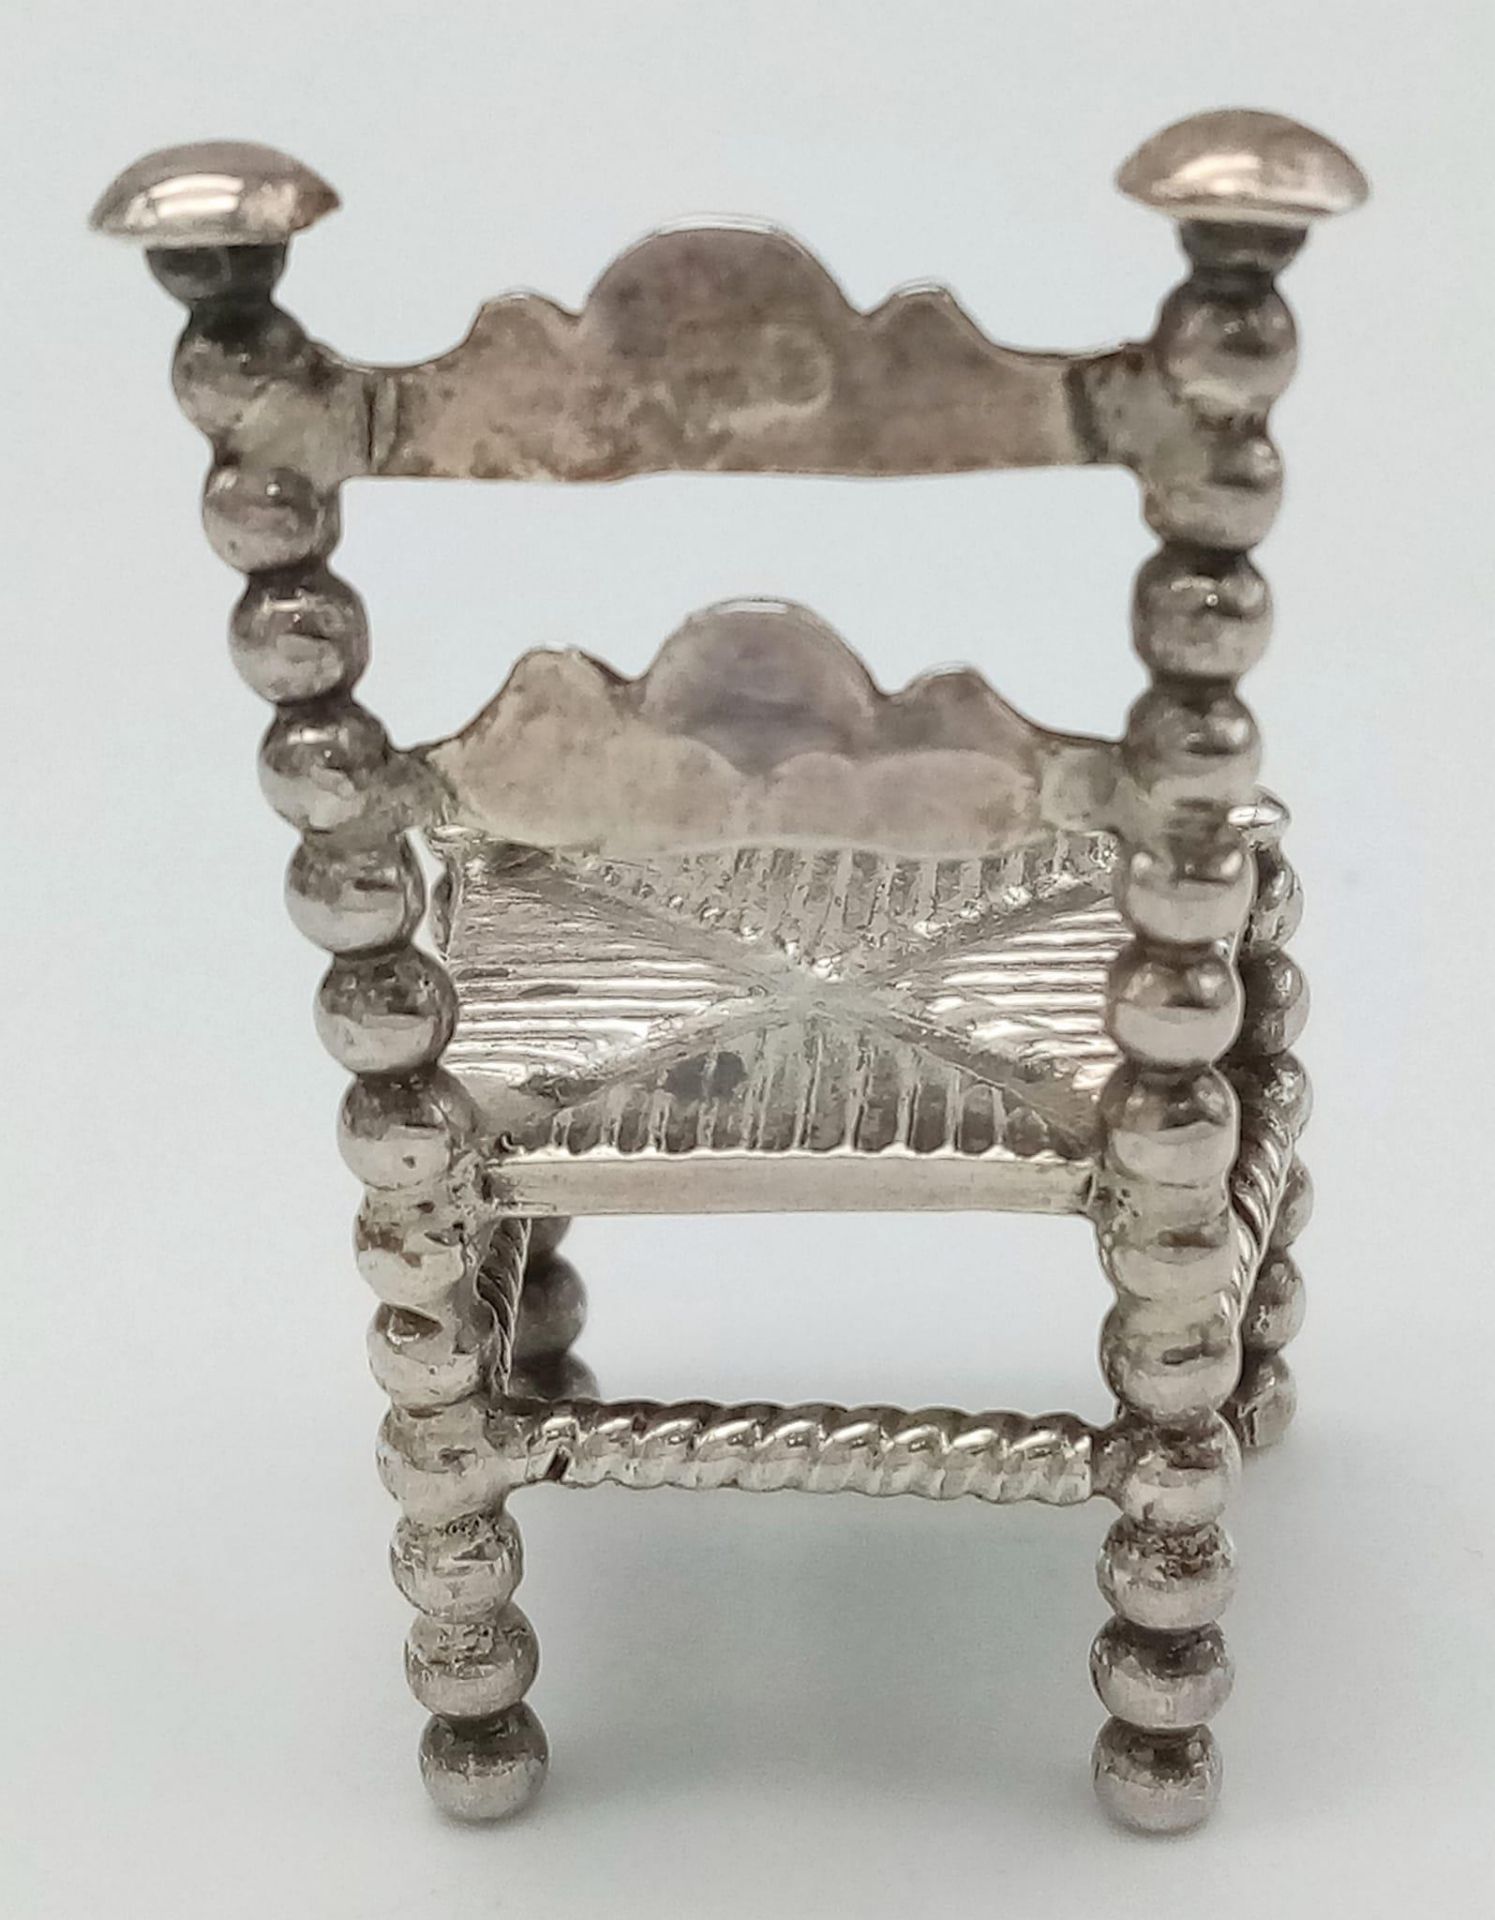 A Rare Imported Sterling Silver Miniature Chair Figure - 4cm tall. The chair has hallmarks for - Bild 3 aus 5